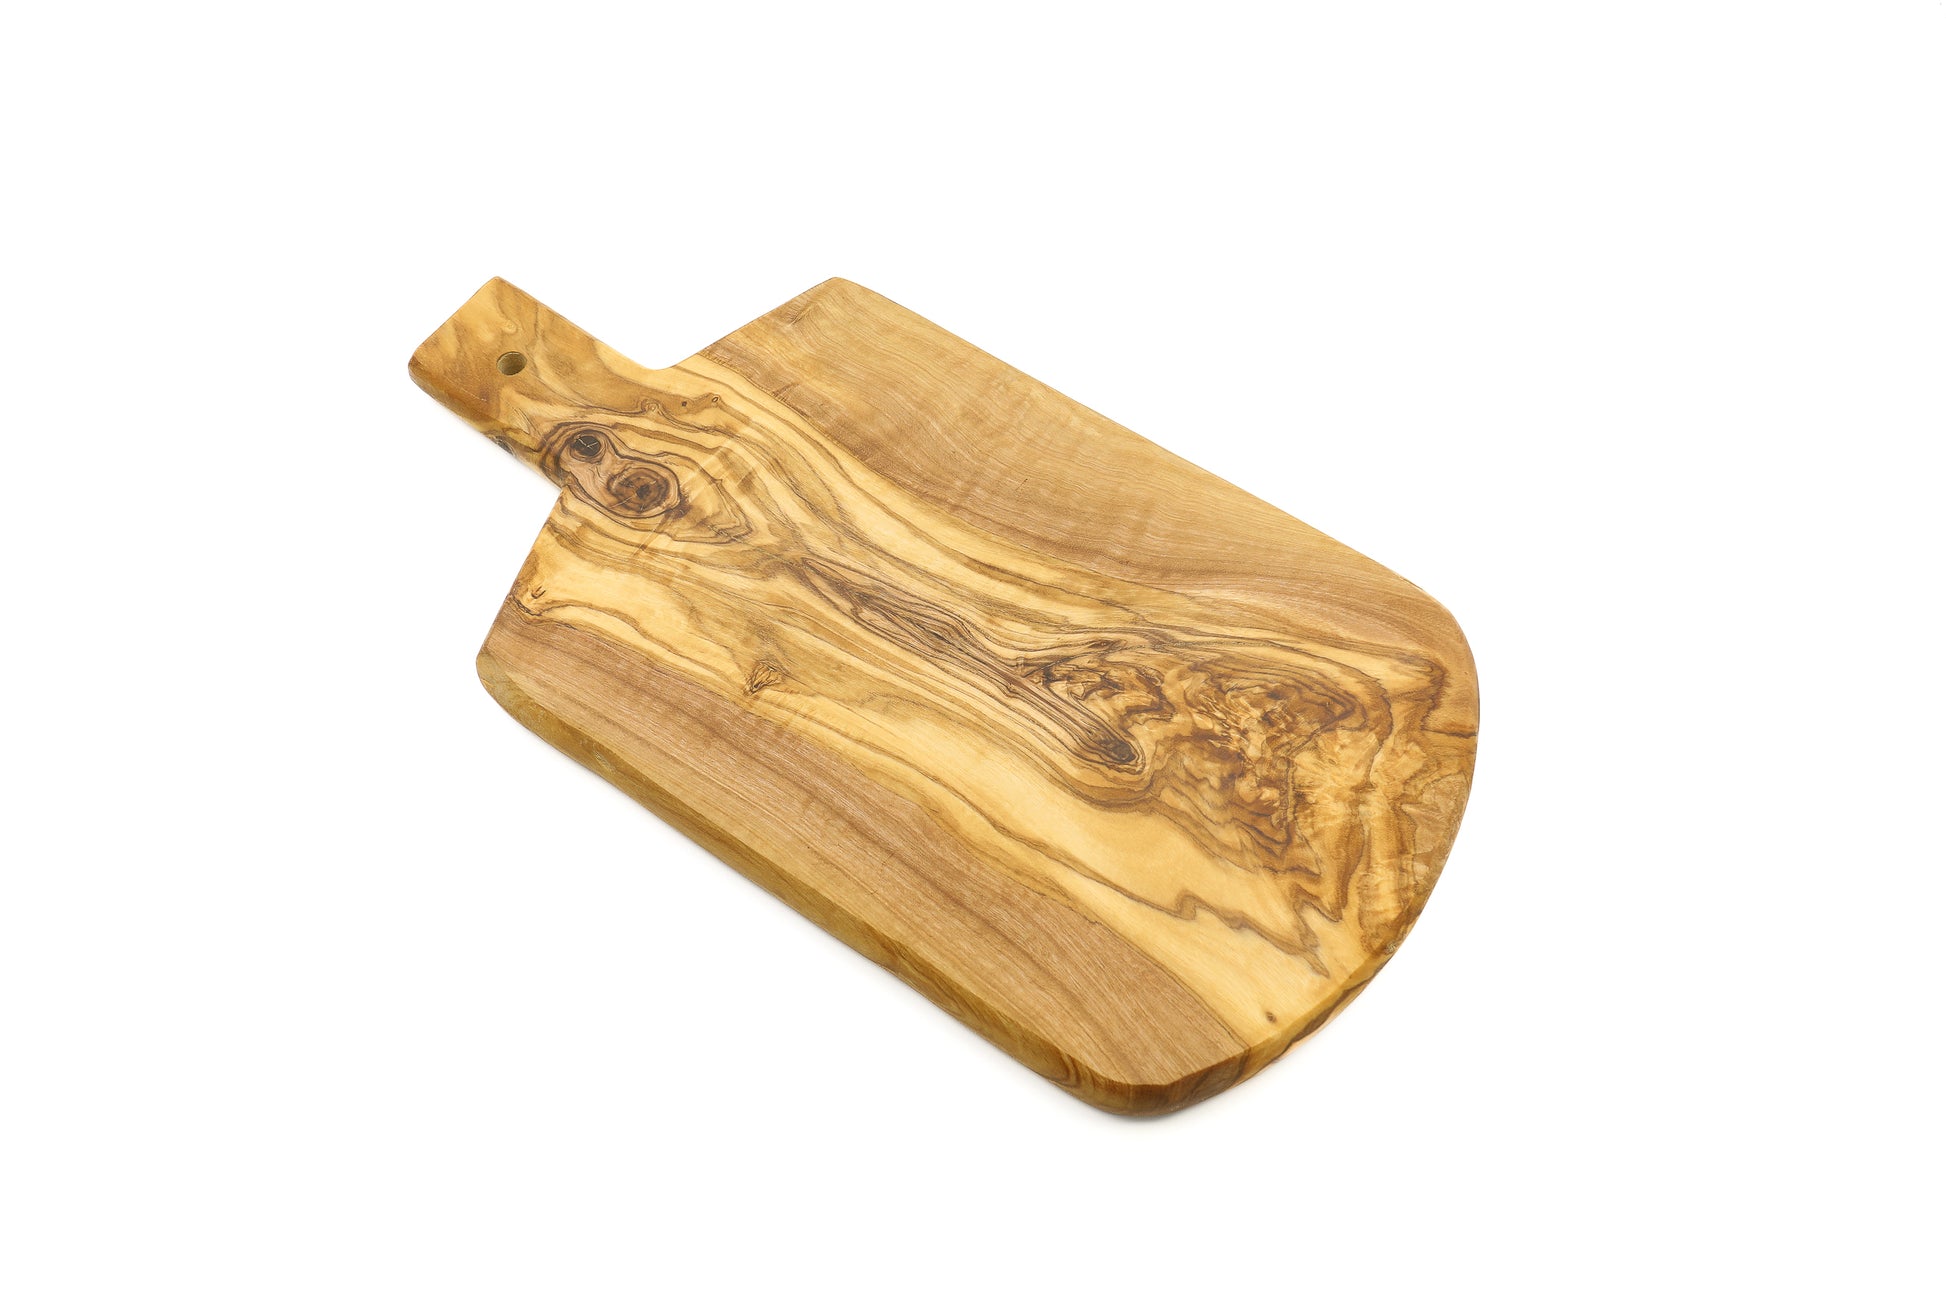 Olive wood serving board designed in a shield shape with a handle